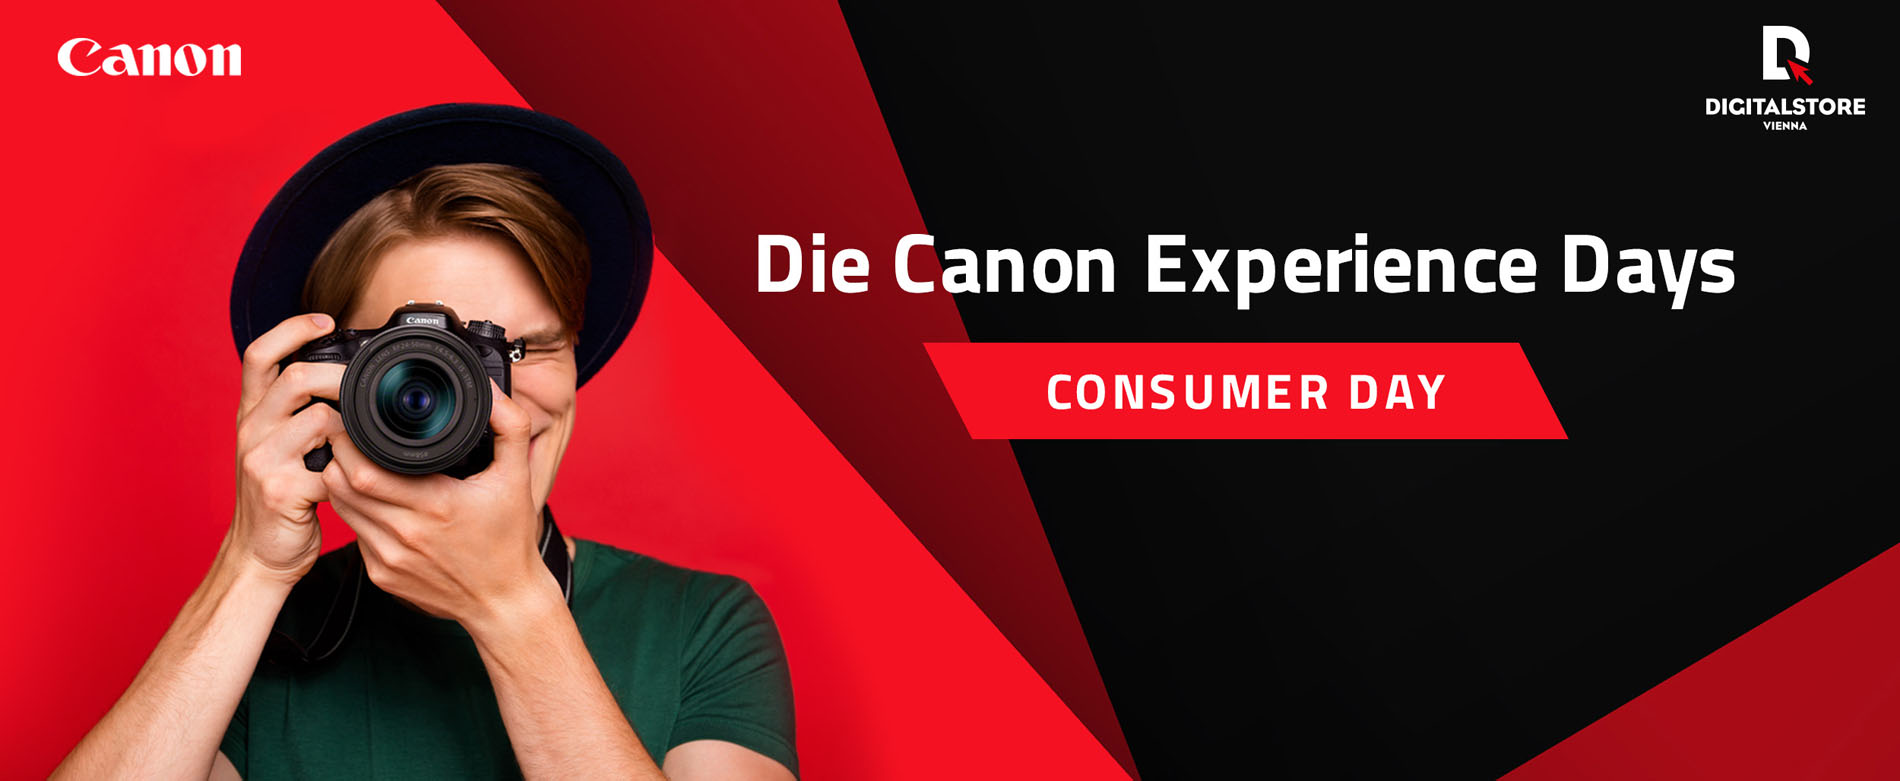 Canon Experience Days „Consumer Day“